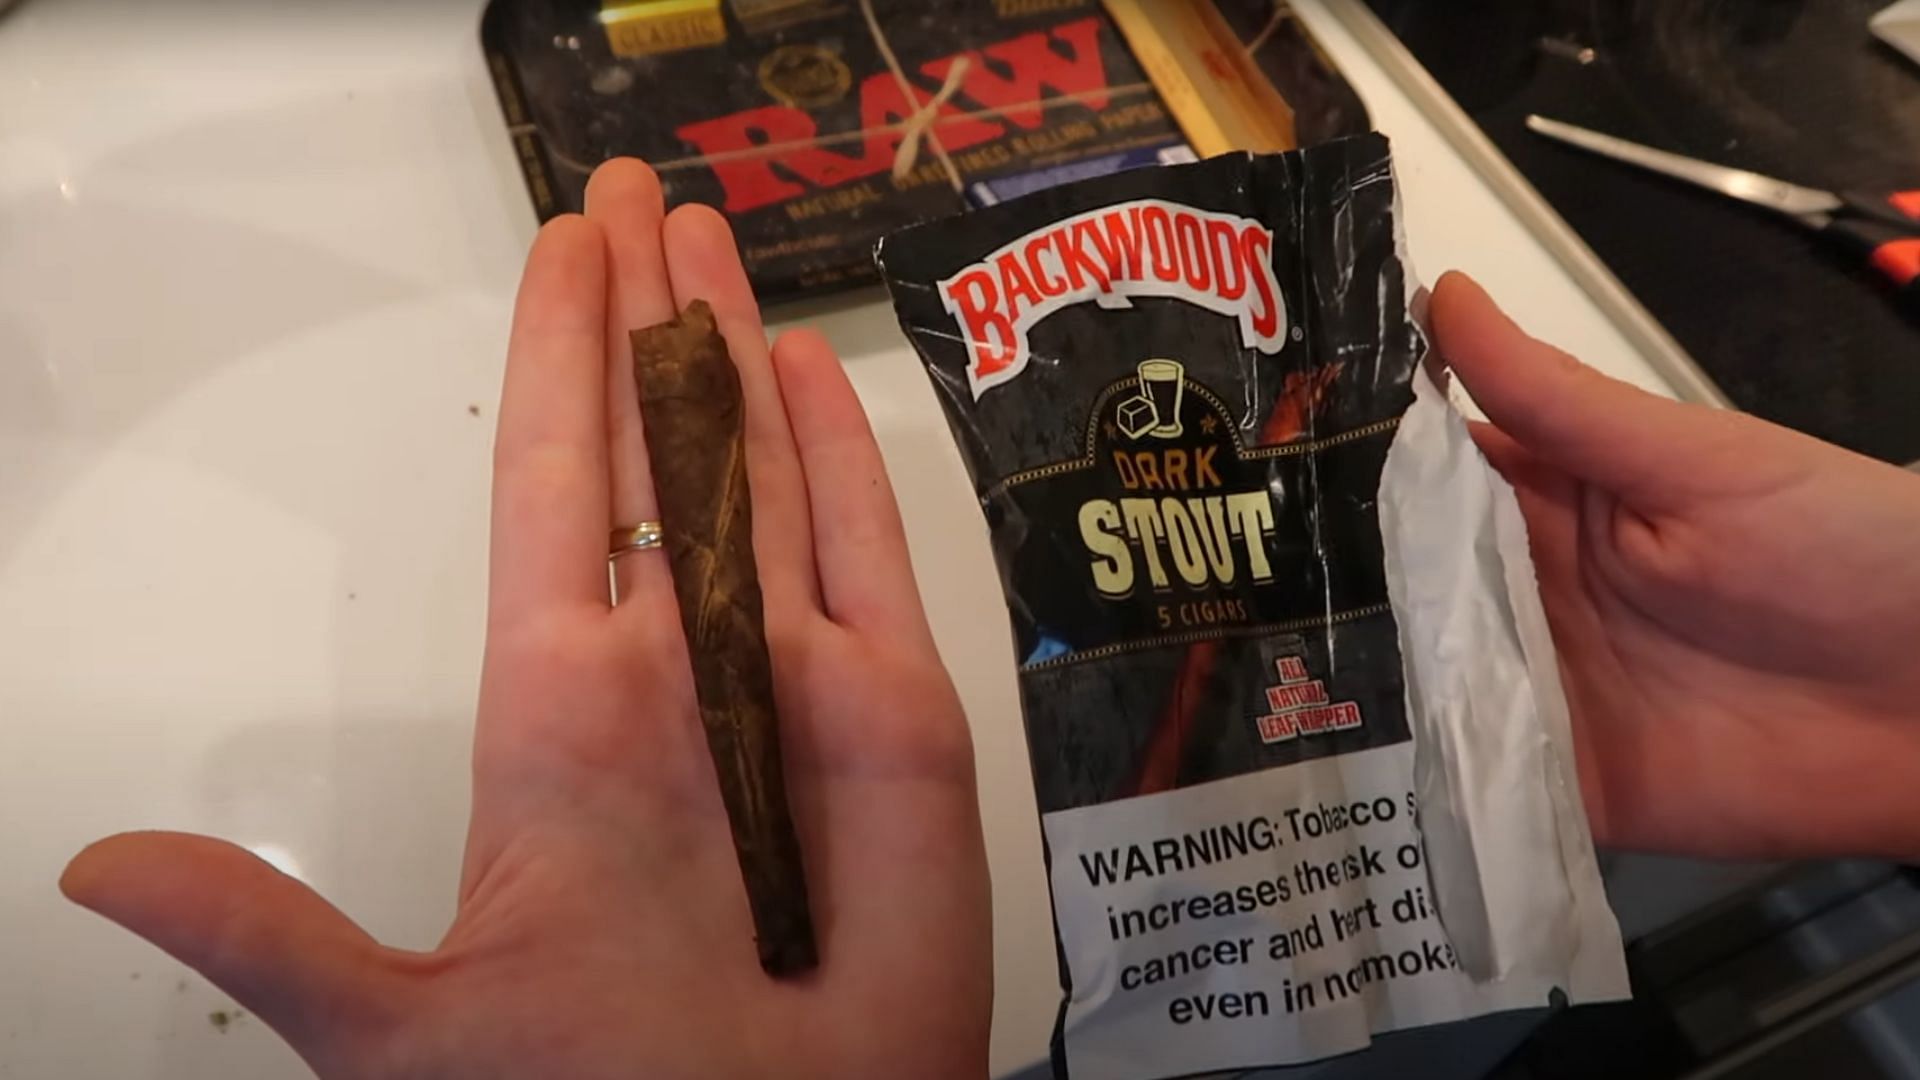 What's a Backwoods Blunt & How do You Roll One?